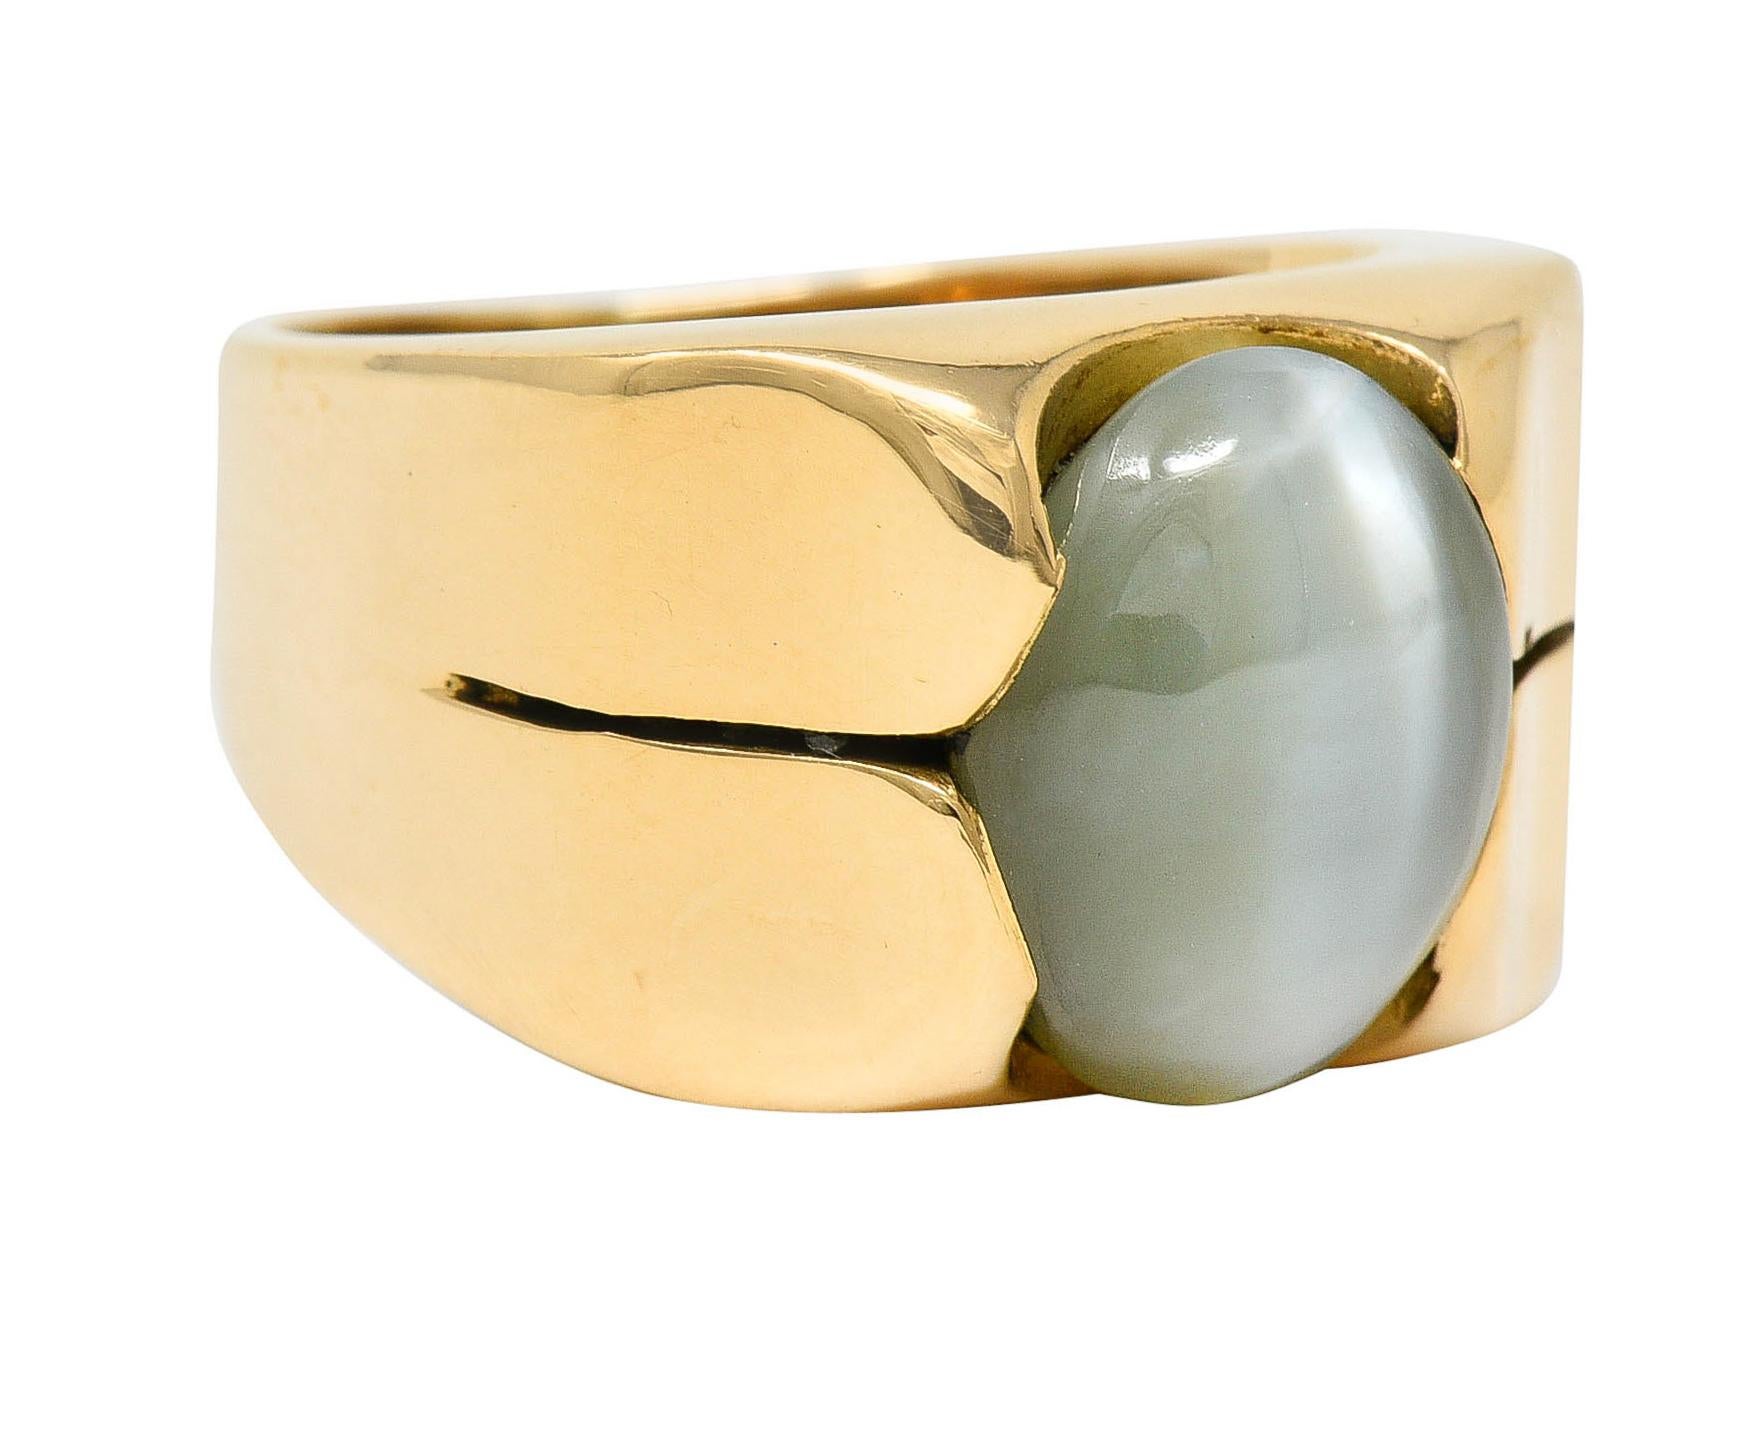 Wide band ring features an oval cabochon of cat's eye chrysoberyl

Measuring approximately 12.0 x 9.5 mm

Translucent yellowish green with a sharp to diffused white chatoyant line

Set by stylized wide prongs with subtly split shoulders

Stamped 18K